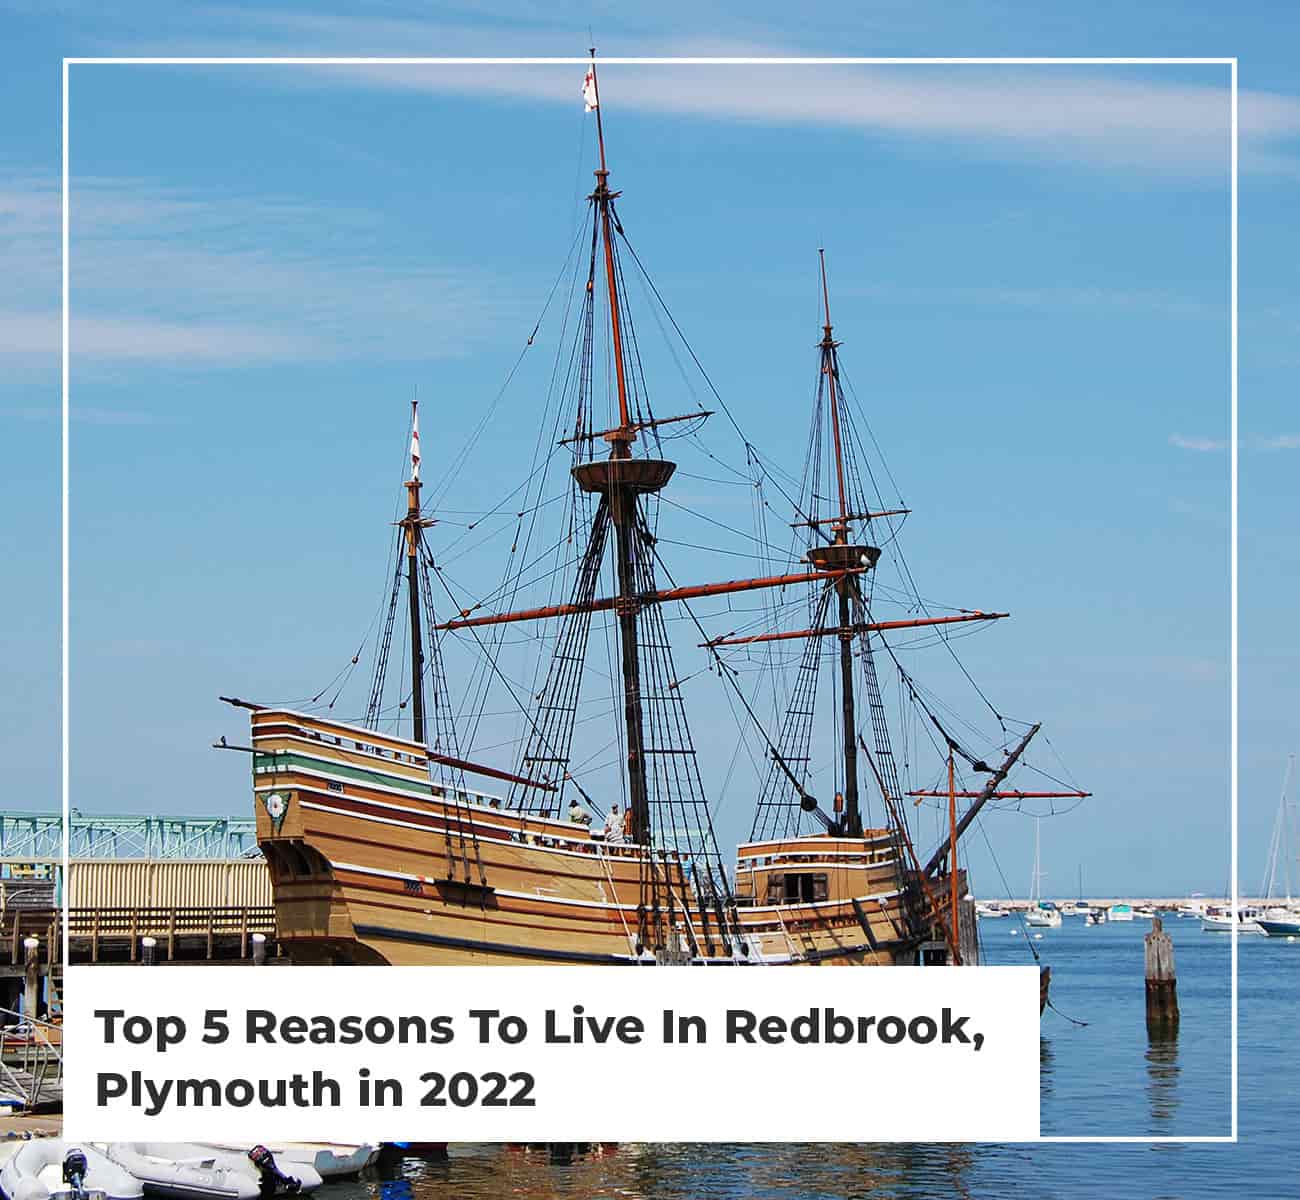 Reasons To Live In Redbrook, Plymouth